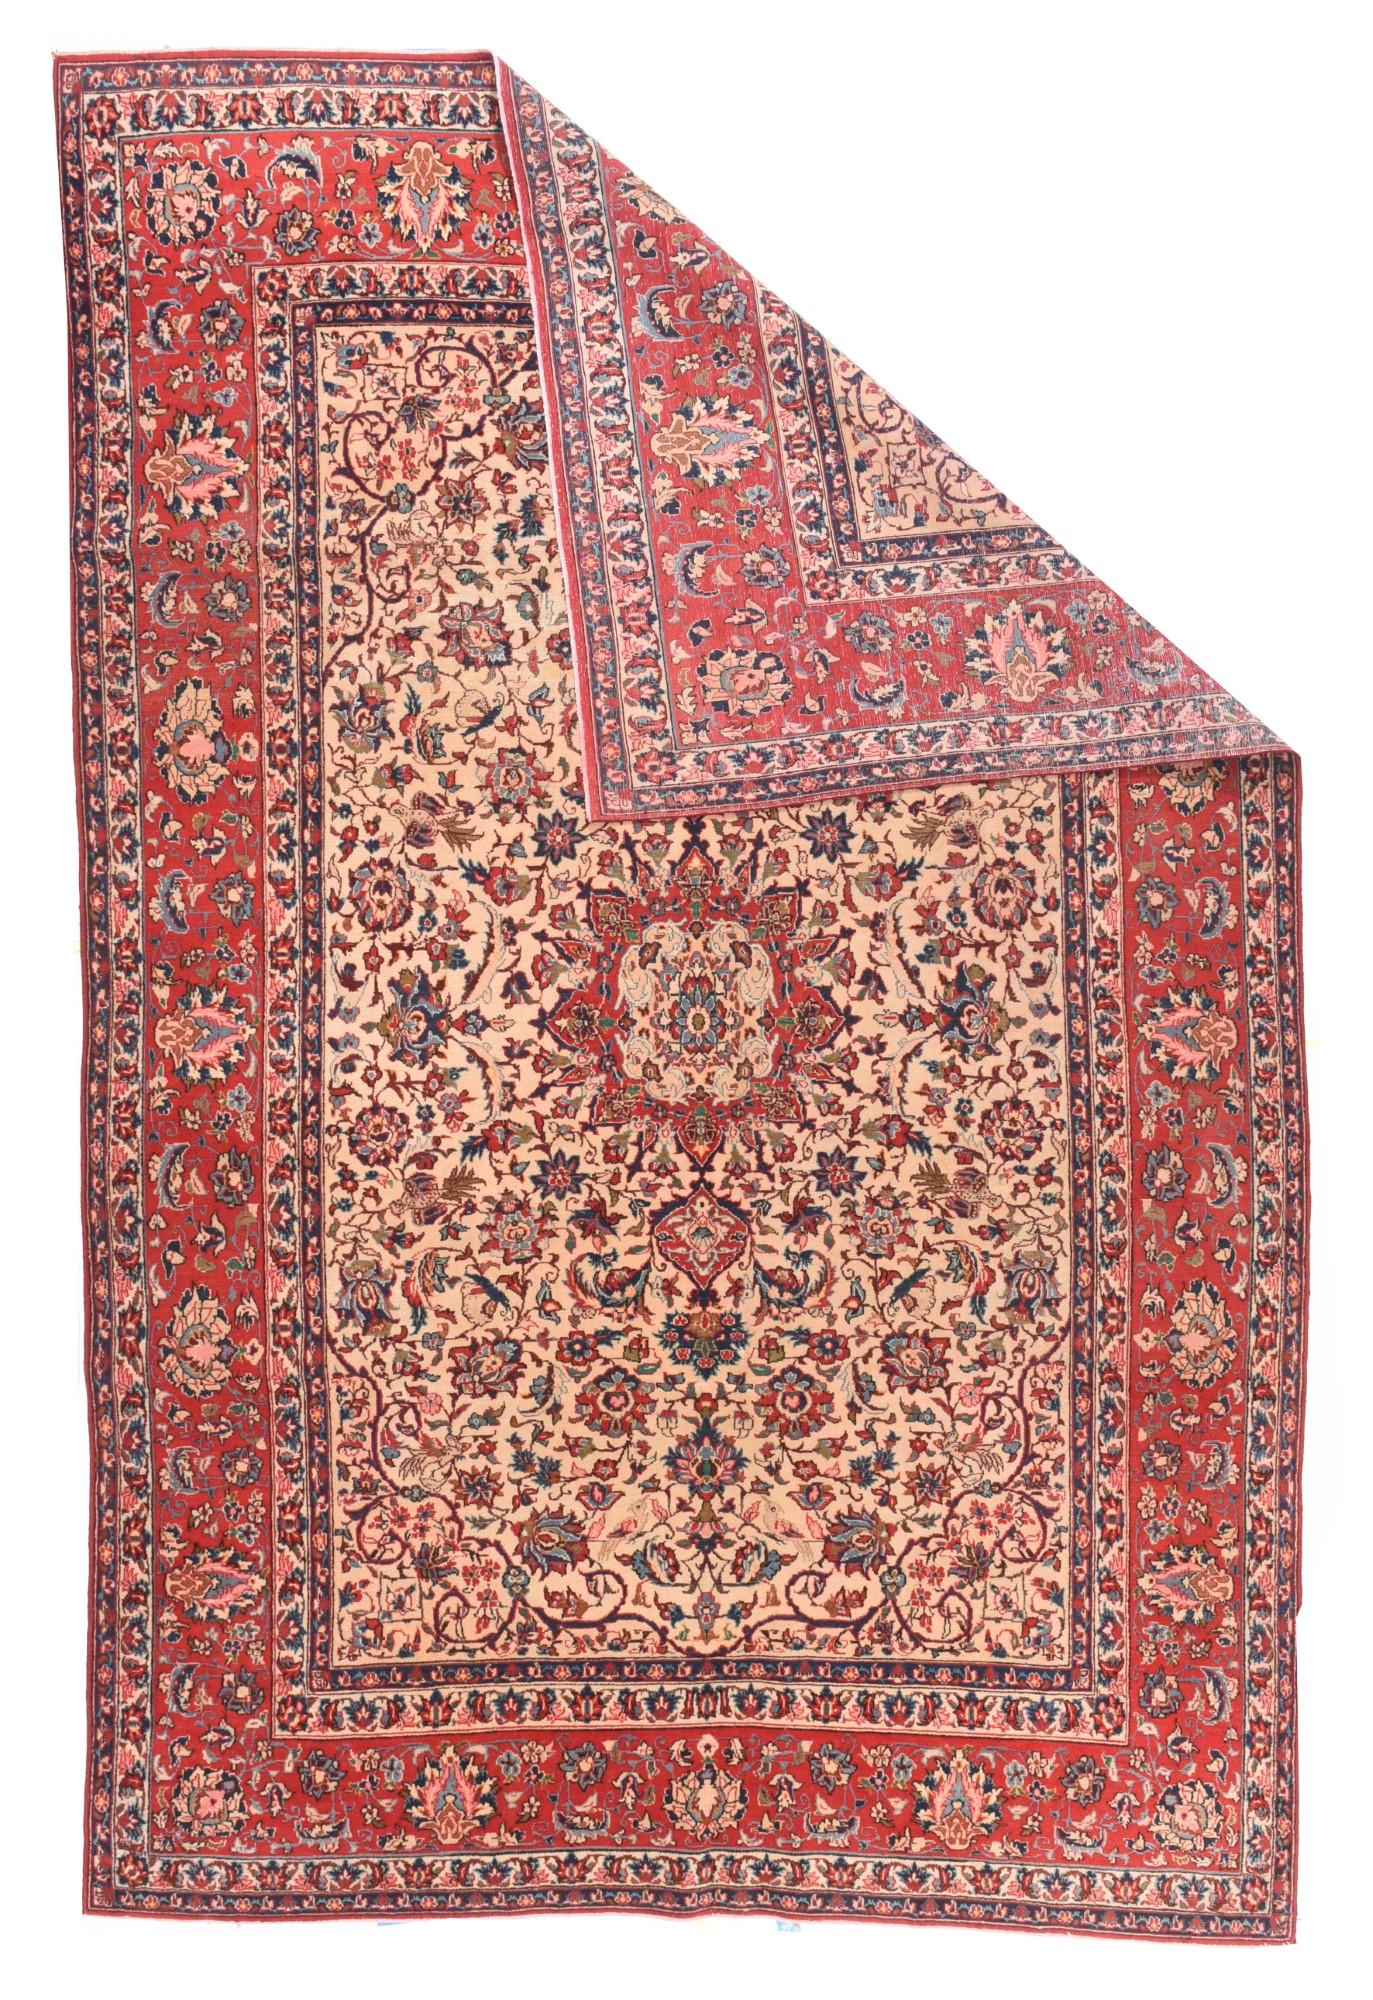 Vintage Isfahan Rug¬† Measures: 6.5'' x 9.10''. Isfahan, in central Persia, was once the capital, and the art and craft was revived after a long hiatus in the Interwar period.. Cream ground/red border combinations have always been popular among